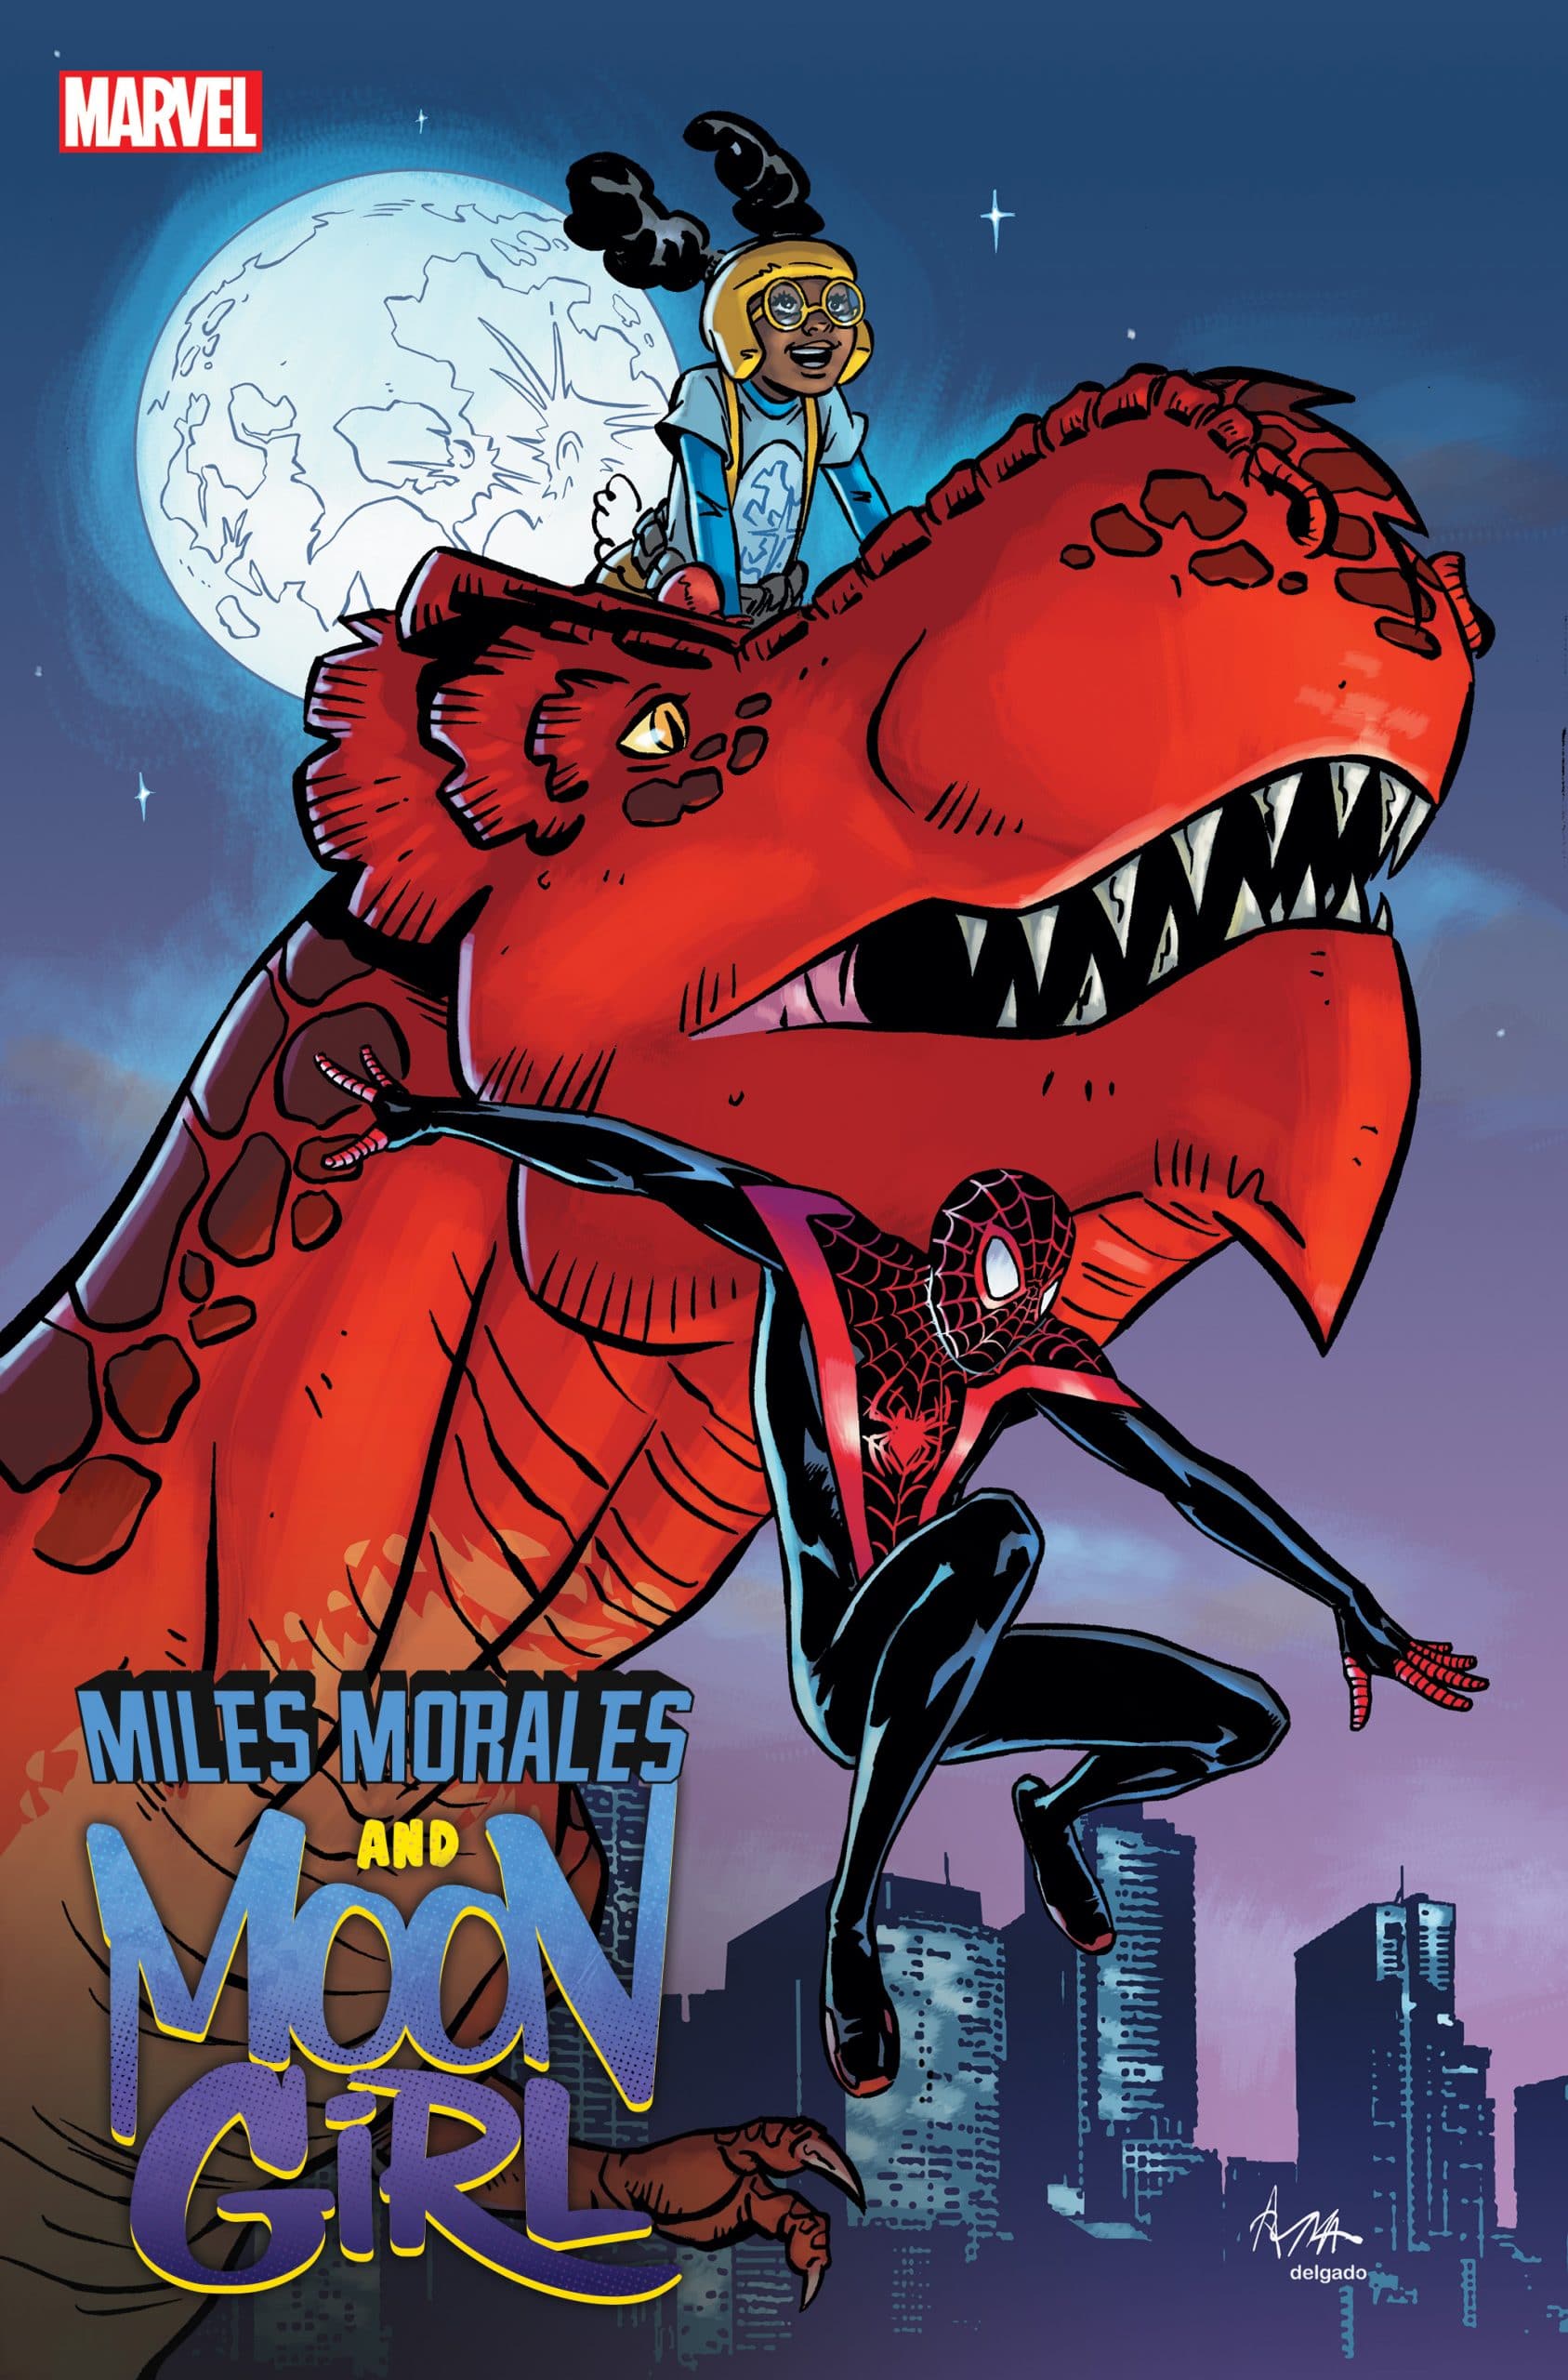 MILES MORALES AND MOON GIRL #1